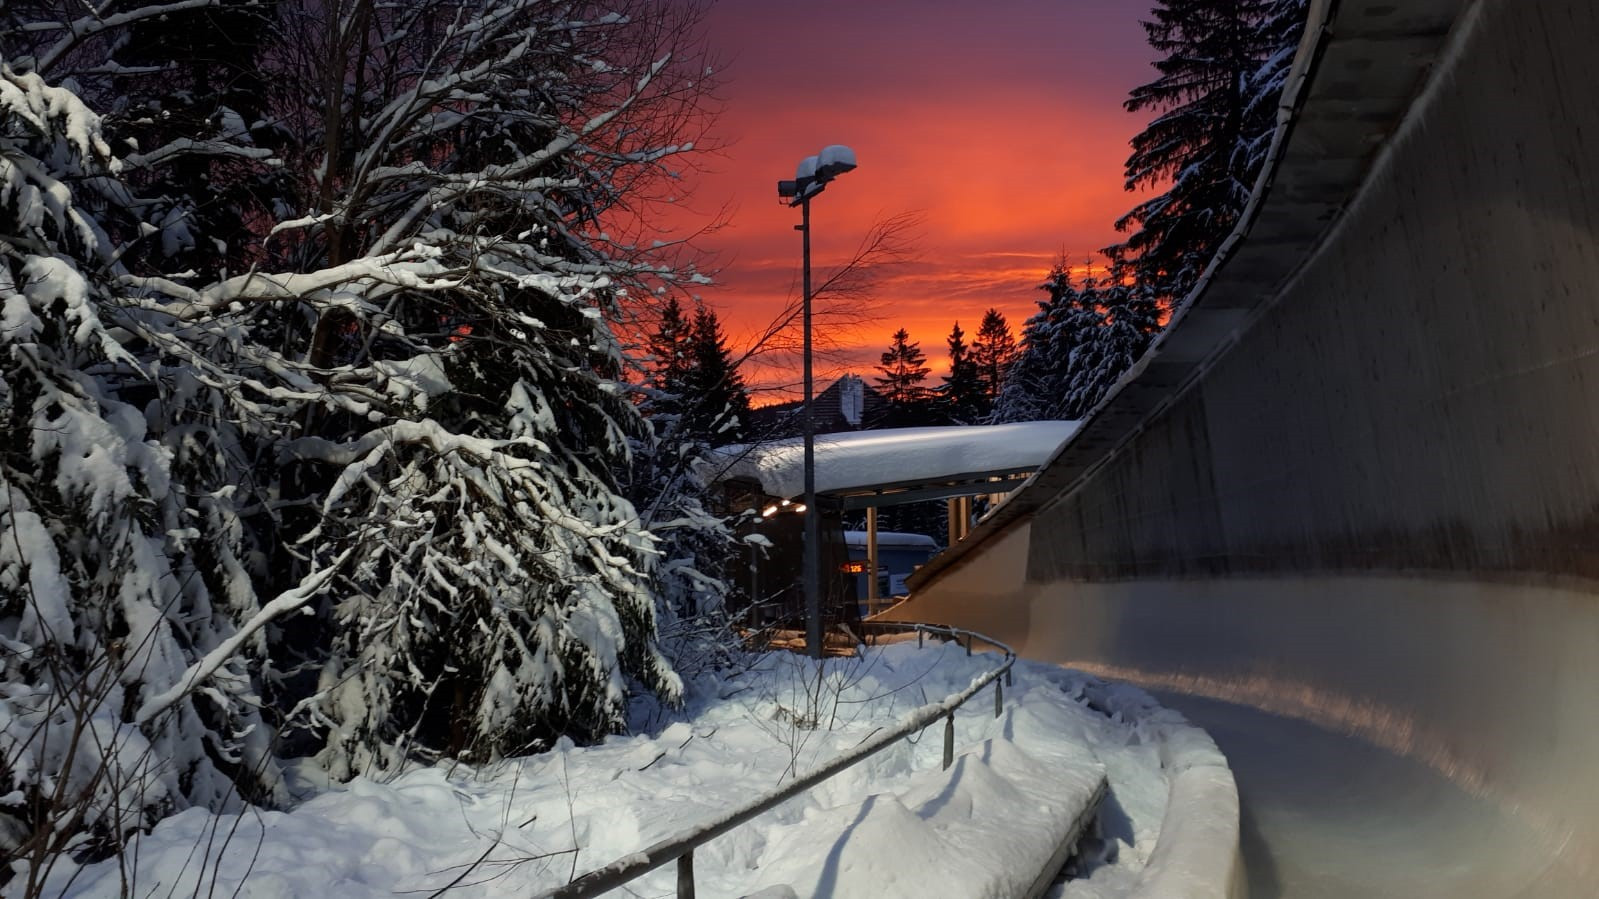 Oberhof enters race to host 2023 Luge World Championships